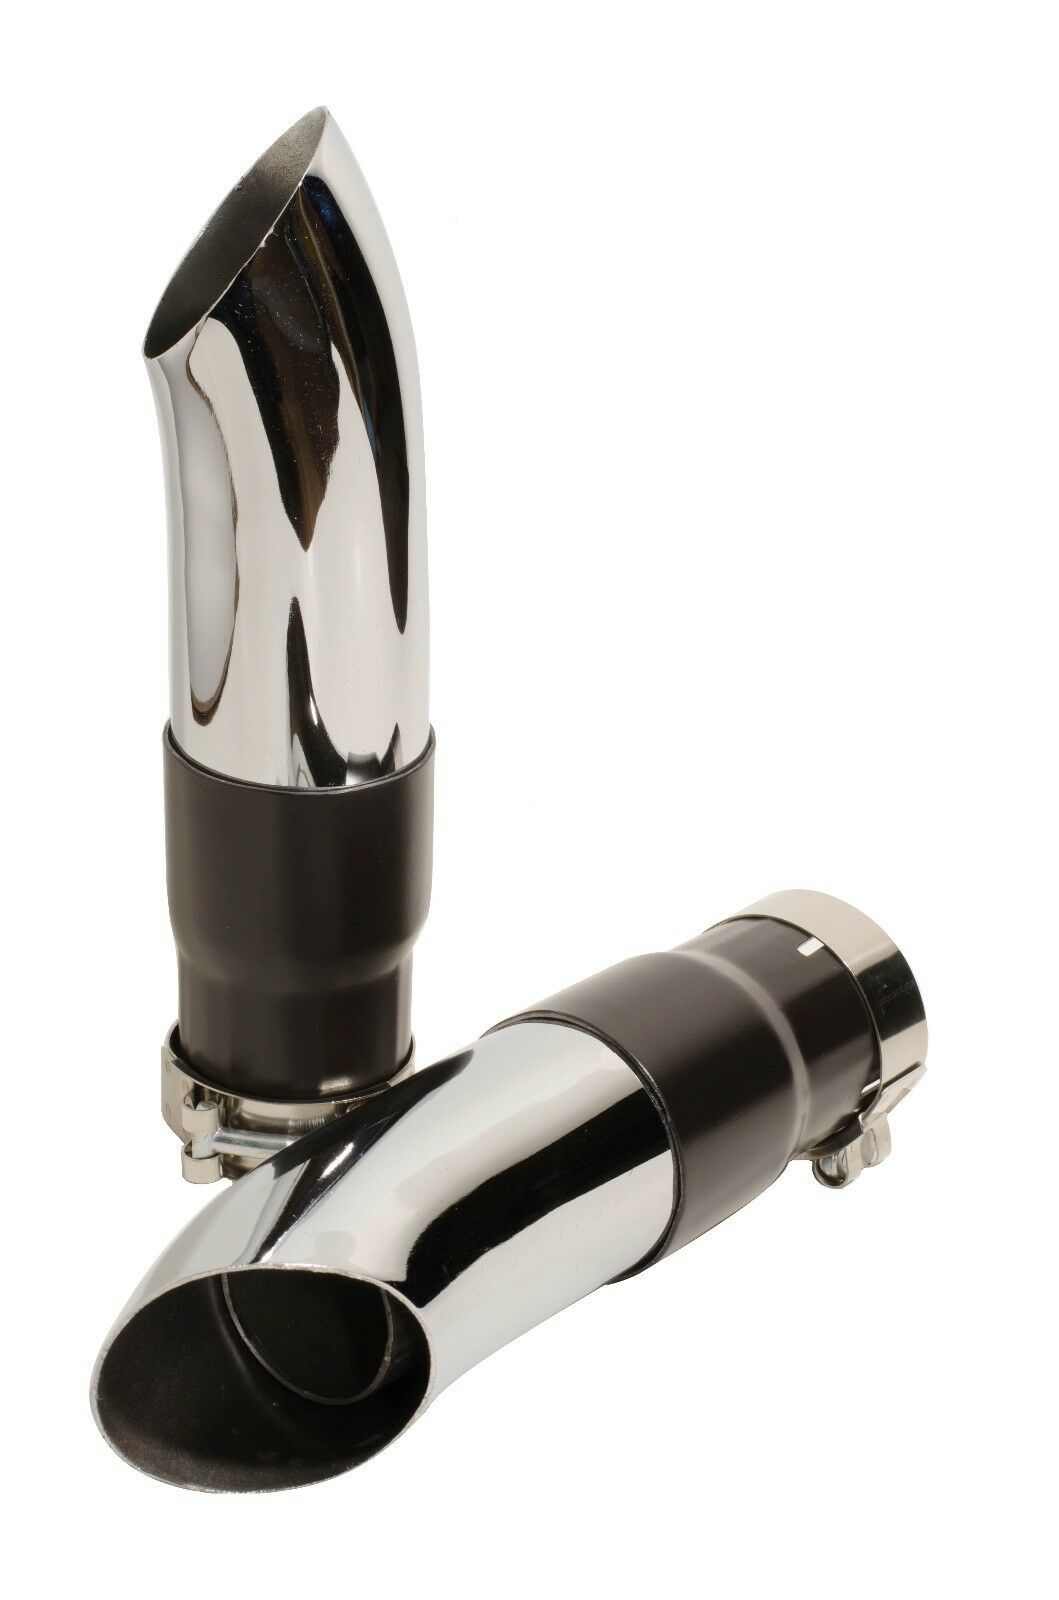 04-13 Harley Sportster 883 Radiant Cycles Shorty GP Exhaust Slip-ons CHROME - $106.42